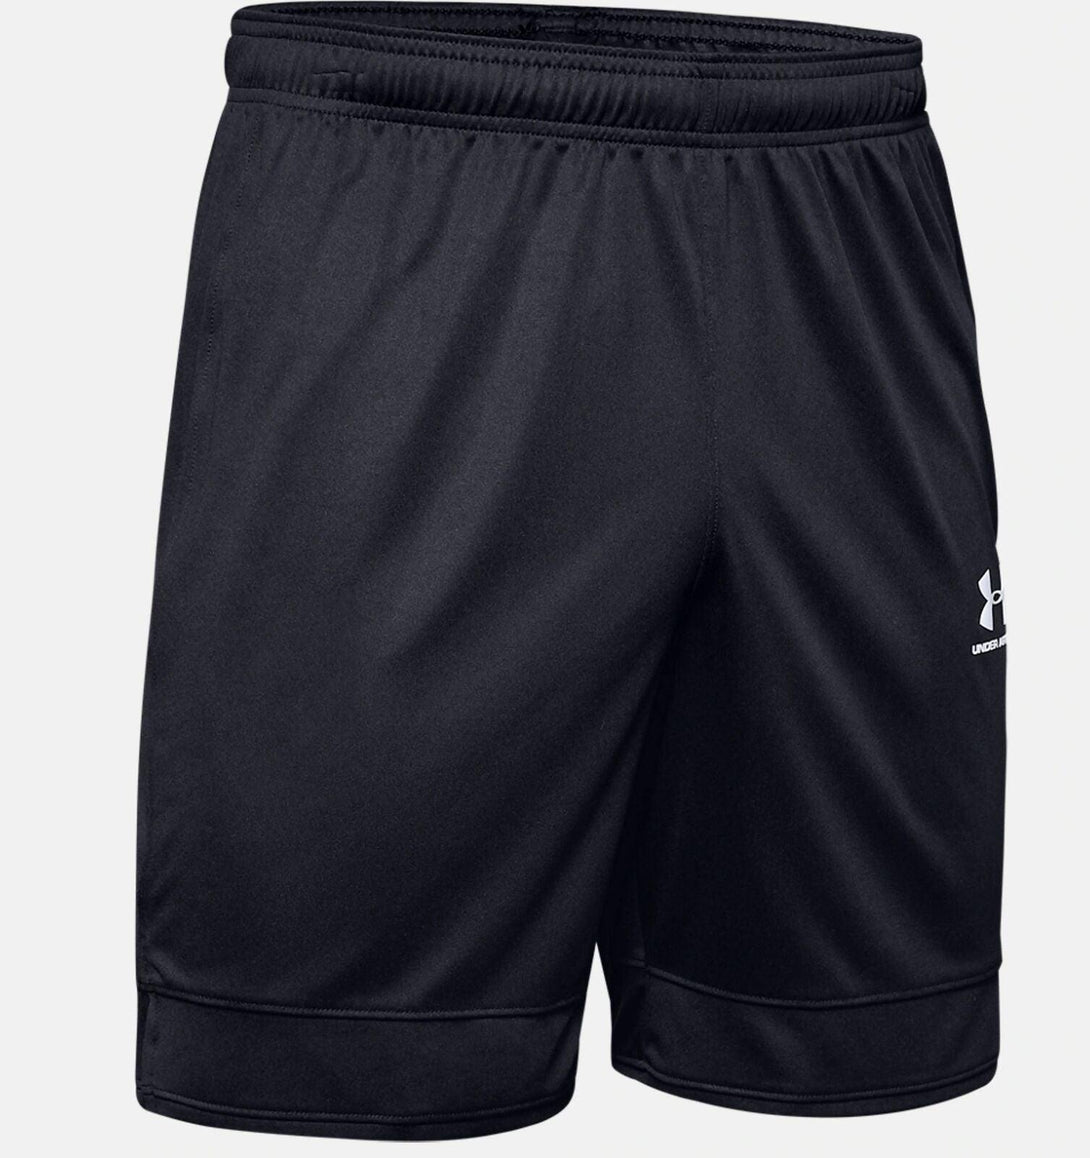 Under Armour Challenger III Knit Shorts